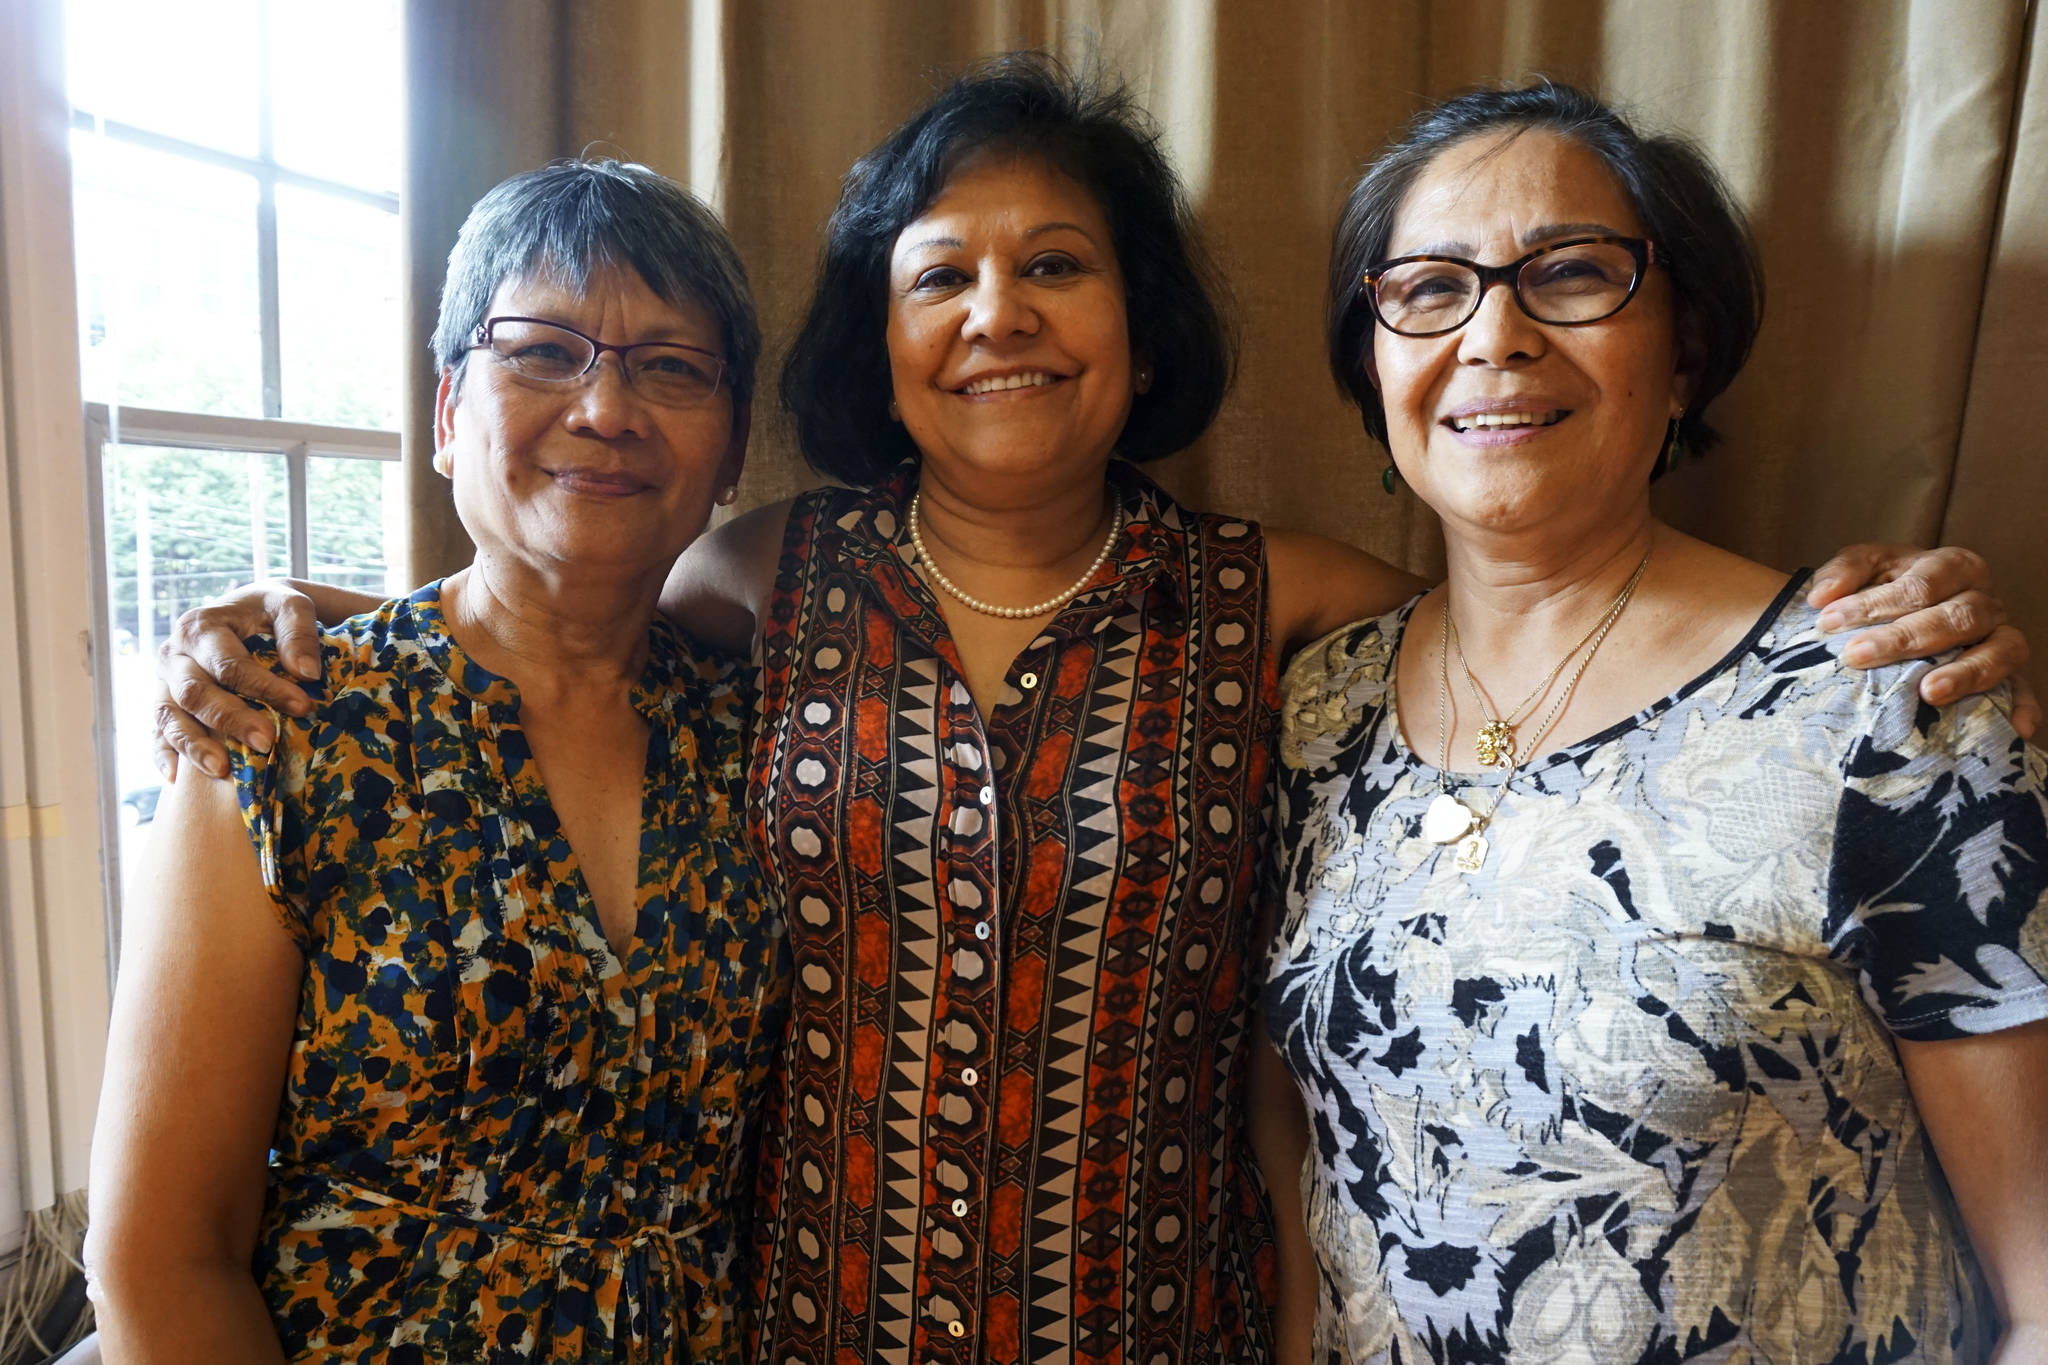 Velma Veloria, Sutapa Basu, and Emma Catague (left to right) have worked to spread labor trafficking awareness over the past two decades. Photo by Melissa Hellmann